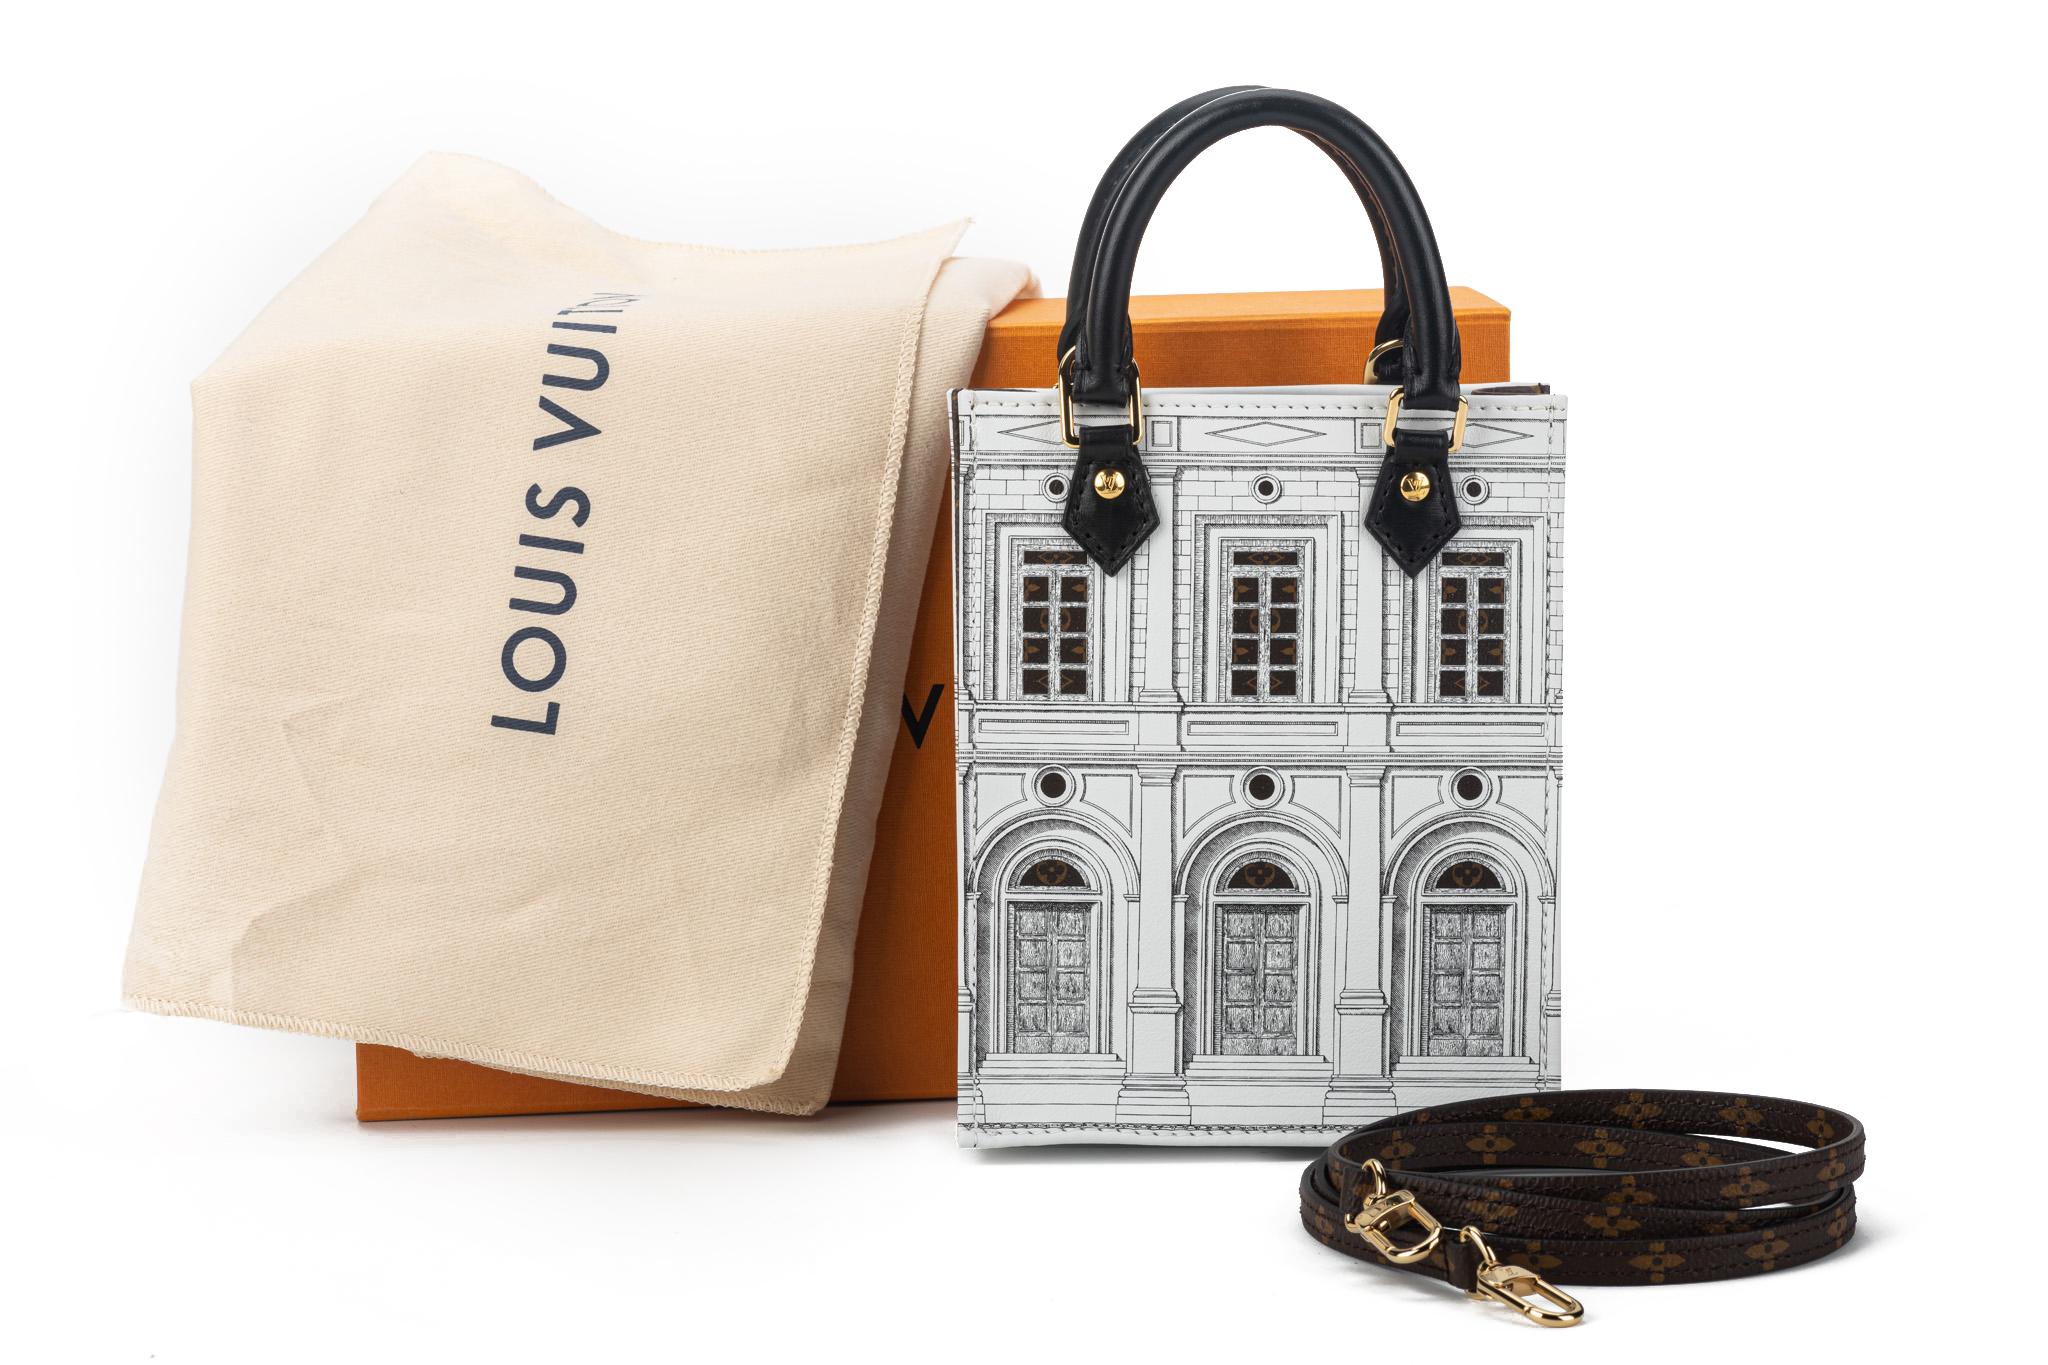 Louis Vuitton 2021 limited edition Fornasetti collection. Brand new in box with dust cover mini sac plat in printed patent leather with monogram trimming. Detachable crossbody strap. Sold out worldwide.
